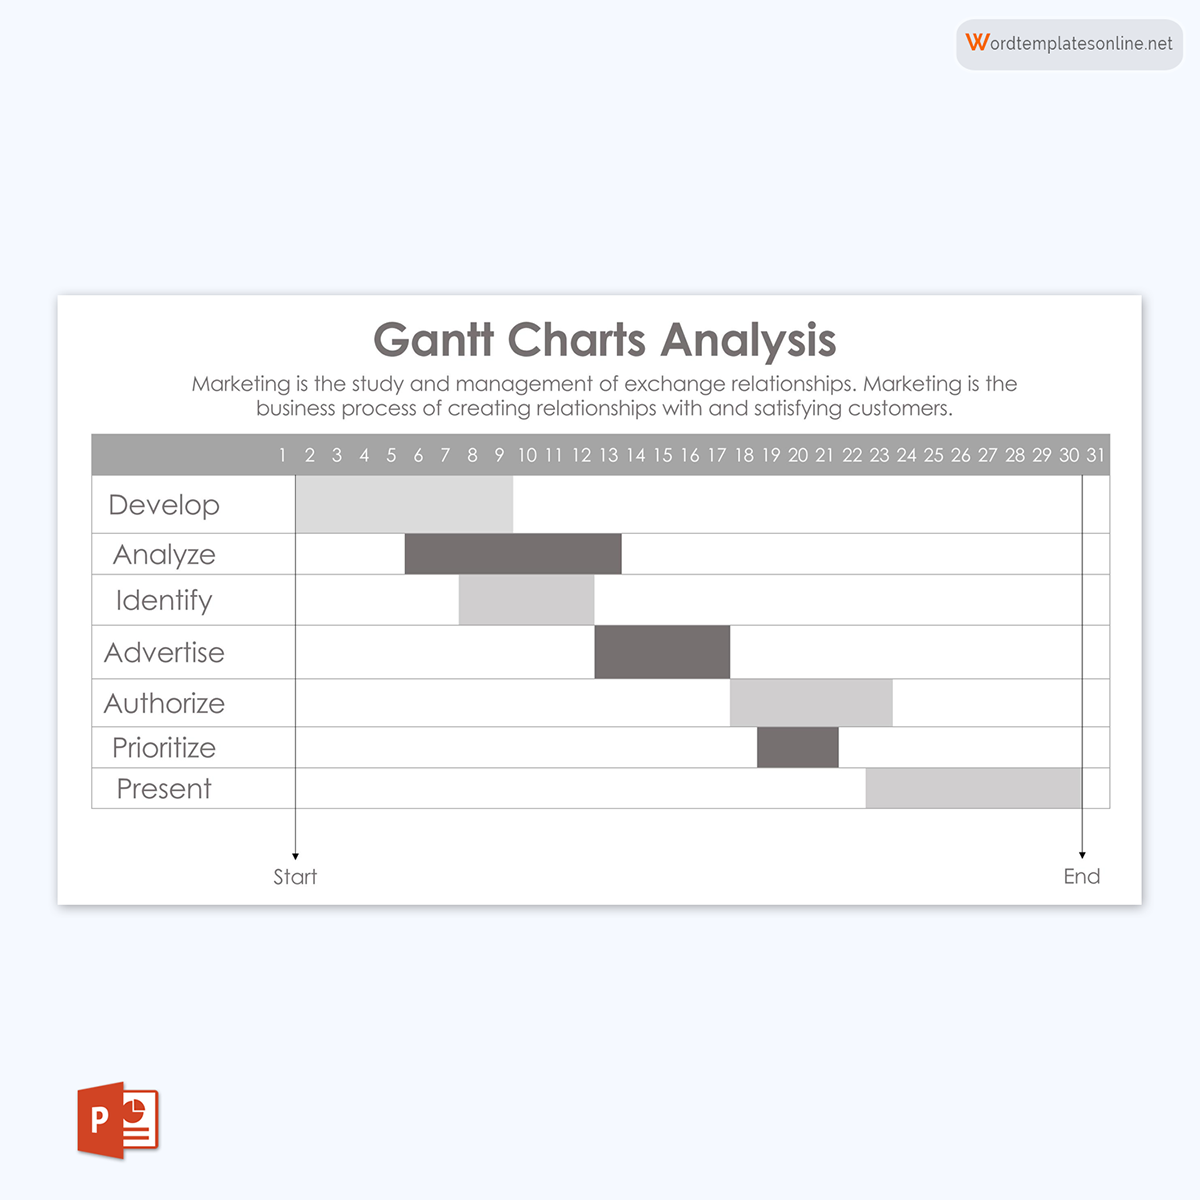 Great Fillable Monthly Gantt Chart Analysis Template 02 as PowerPoint Slides